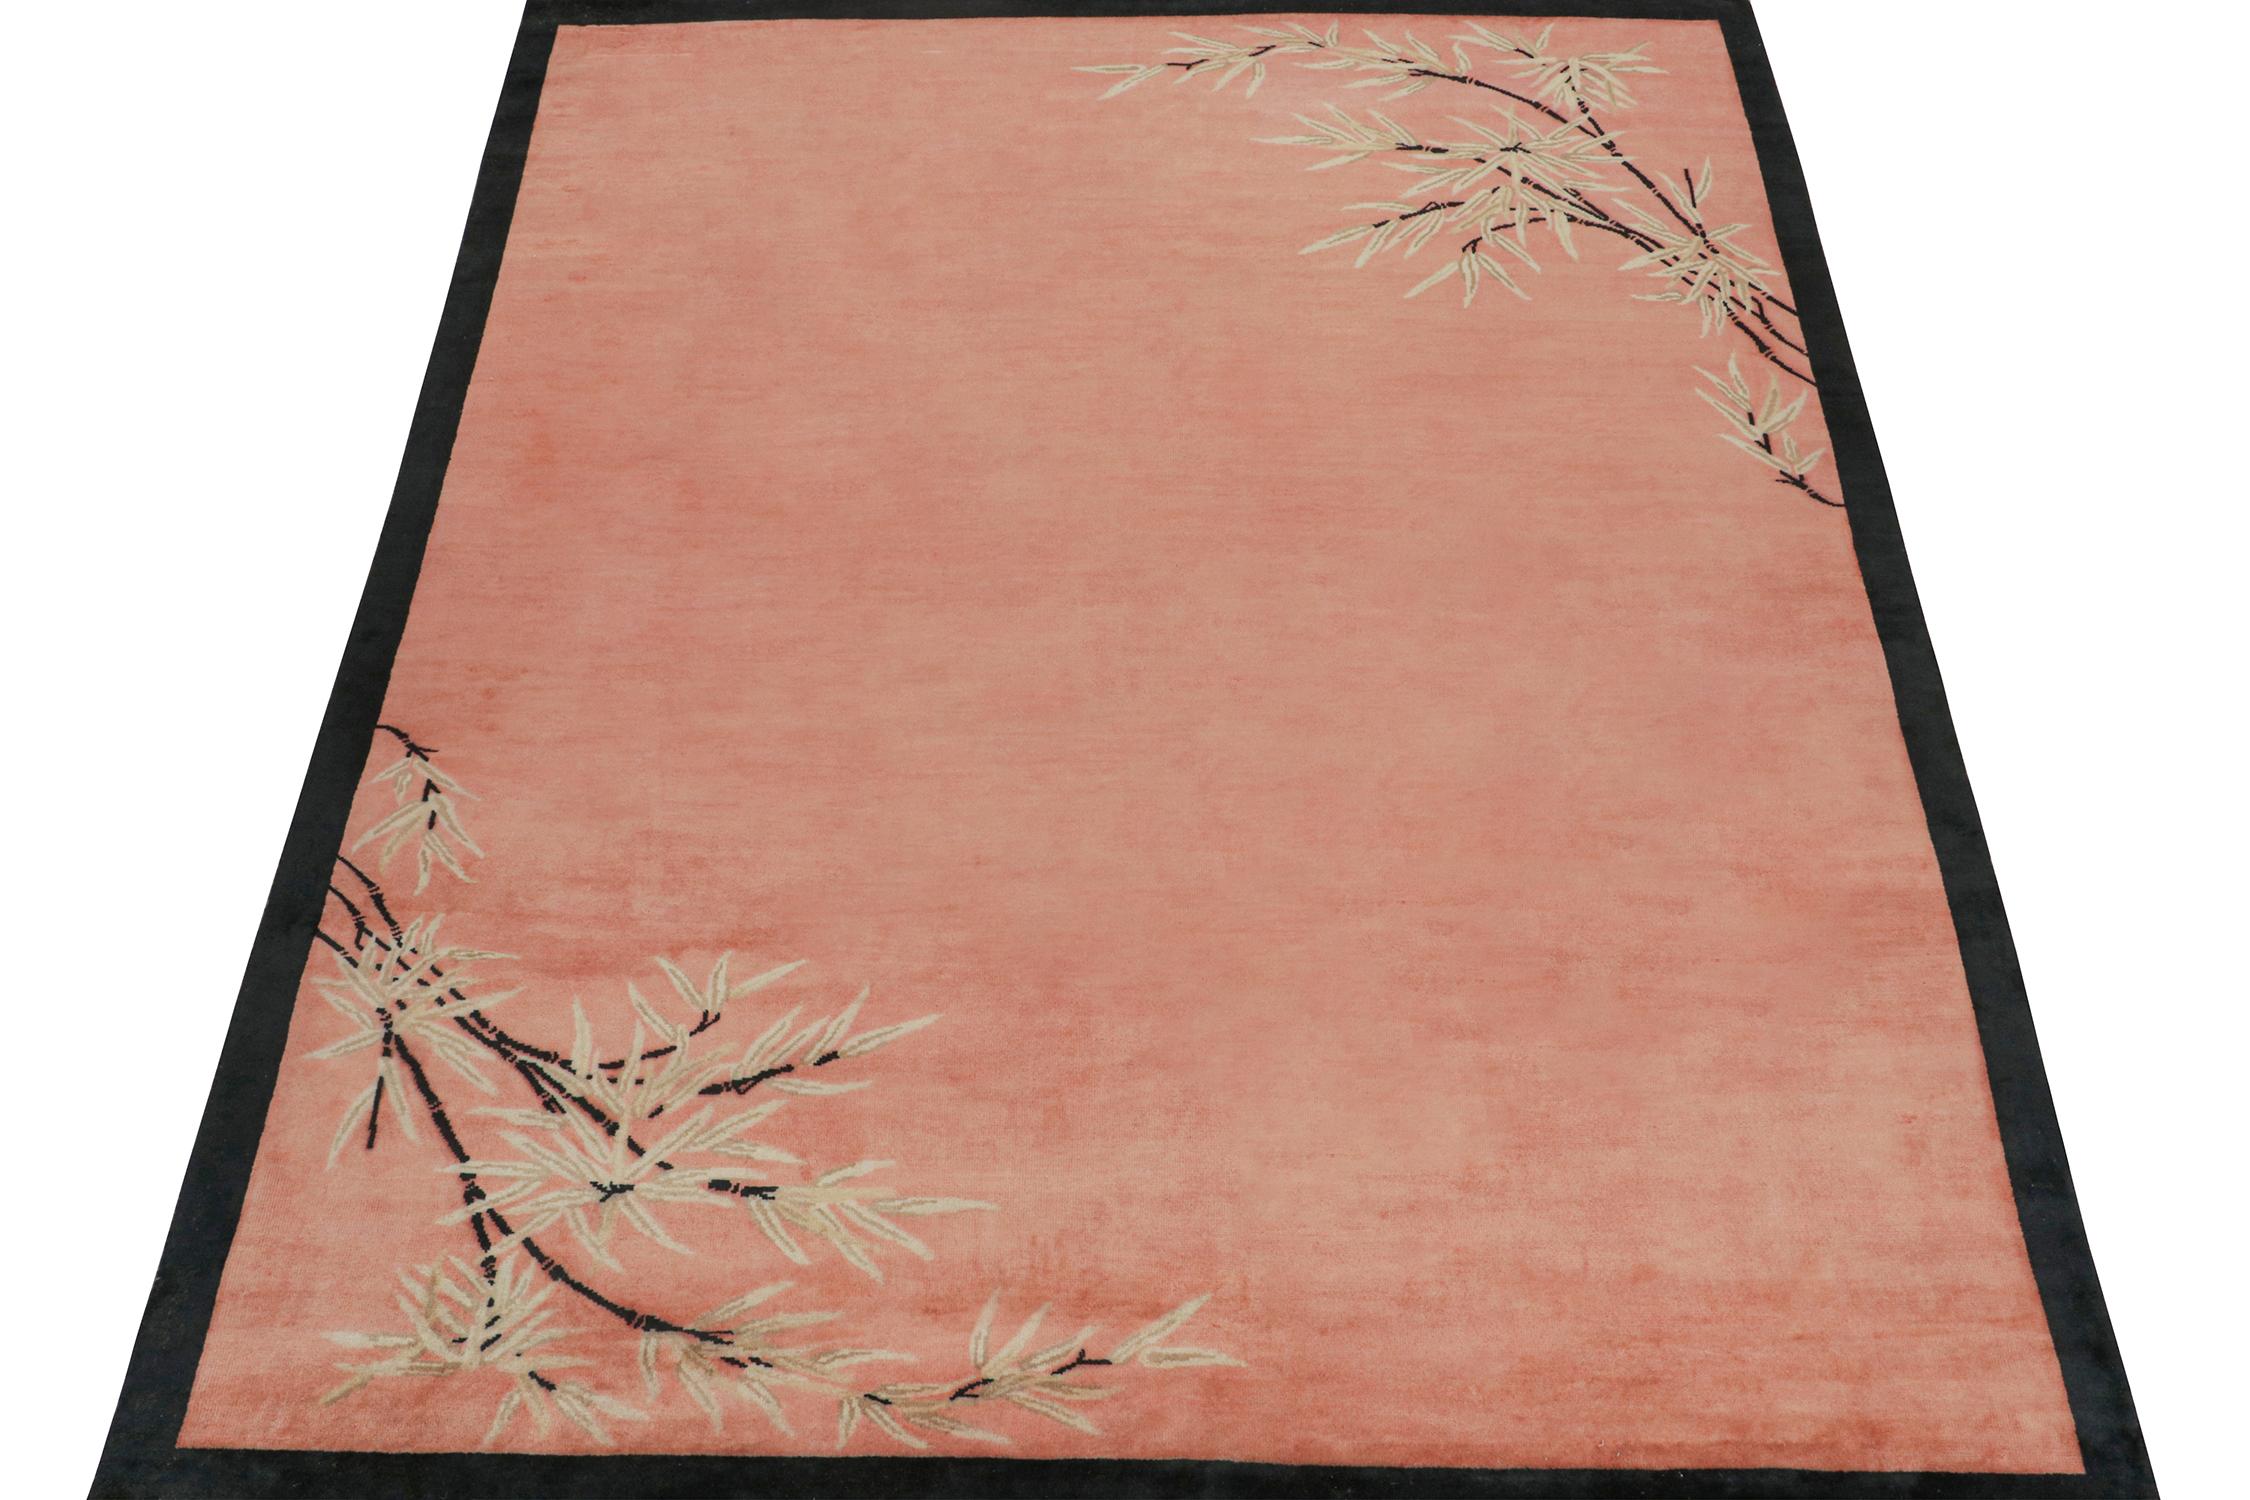 This 8x10 ode to Chinese Art Deco rugs is the next addition to Rug & Kilim's inspired new 
Deco Collection. 

Further On the Design:

The piece enjoys an emphasis on a warm pink background with finely detailed floral patterns within. Connoisseurs